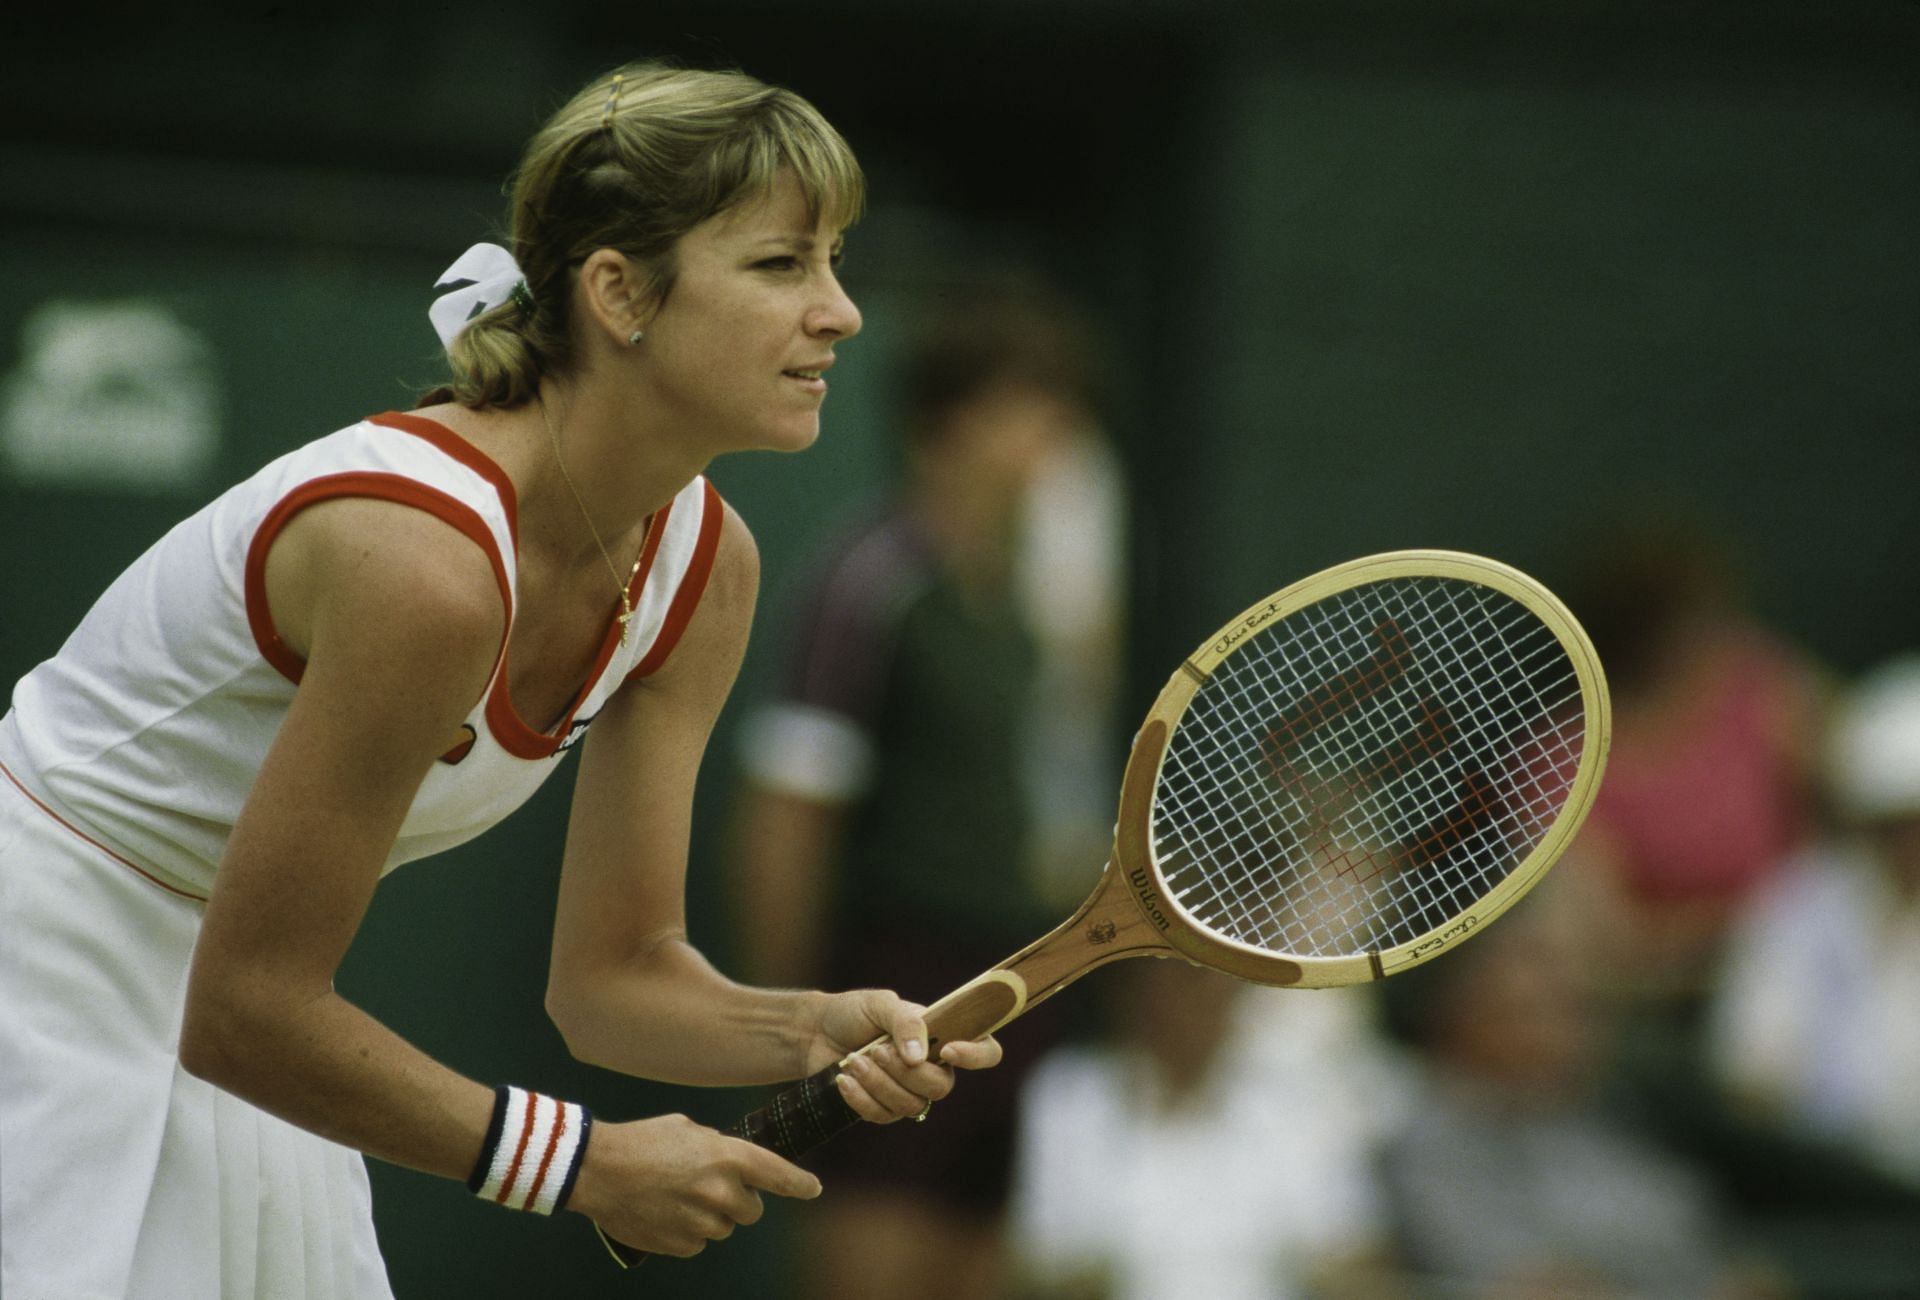 Chris Evert in action at the 1982 Wimbledon Championships